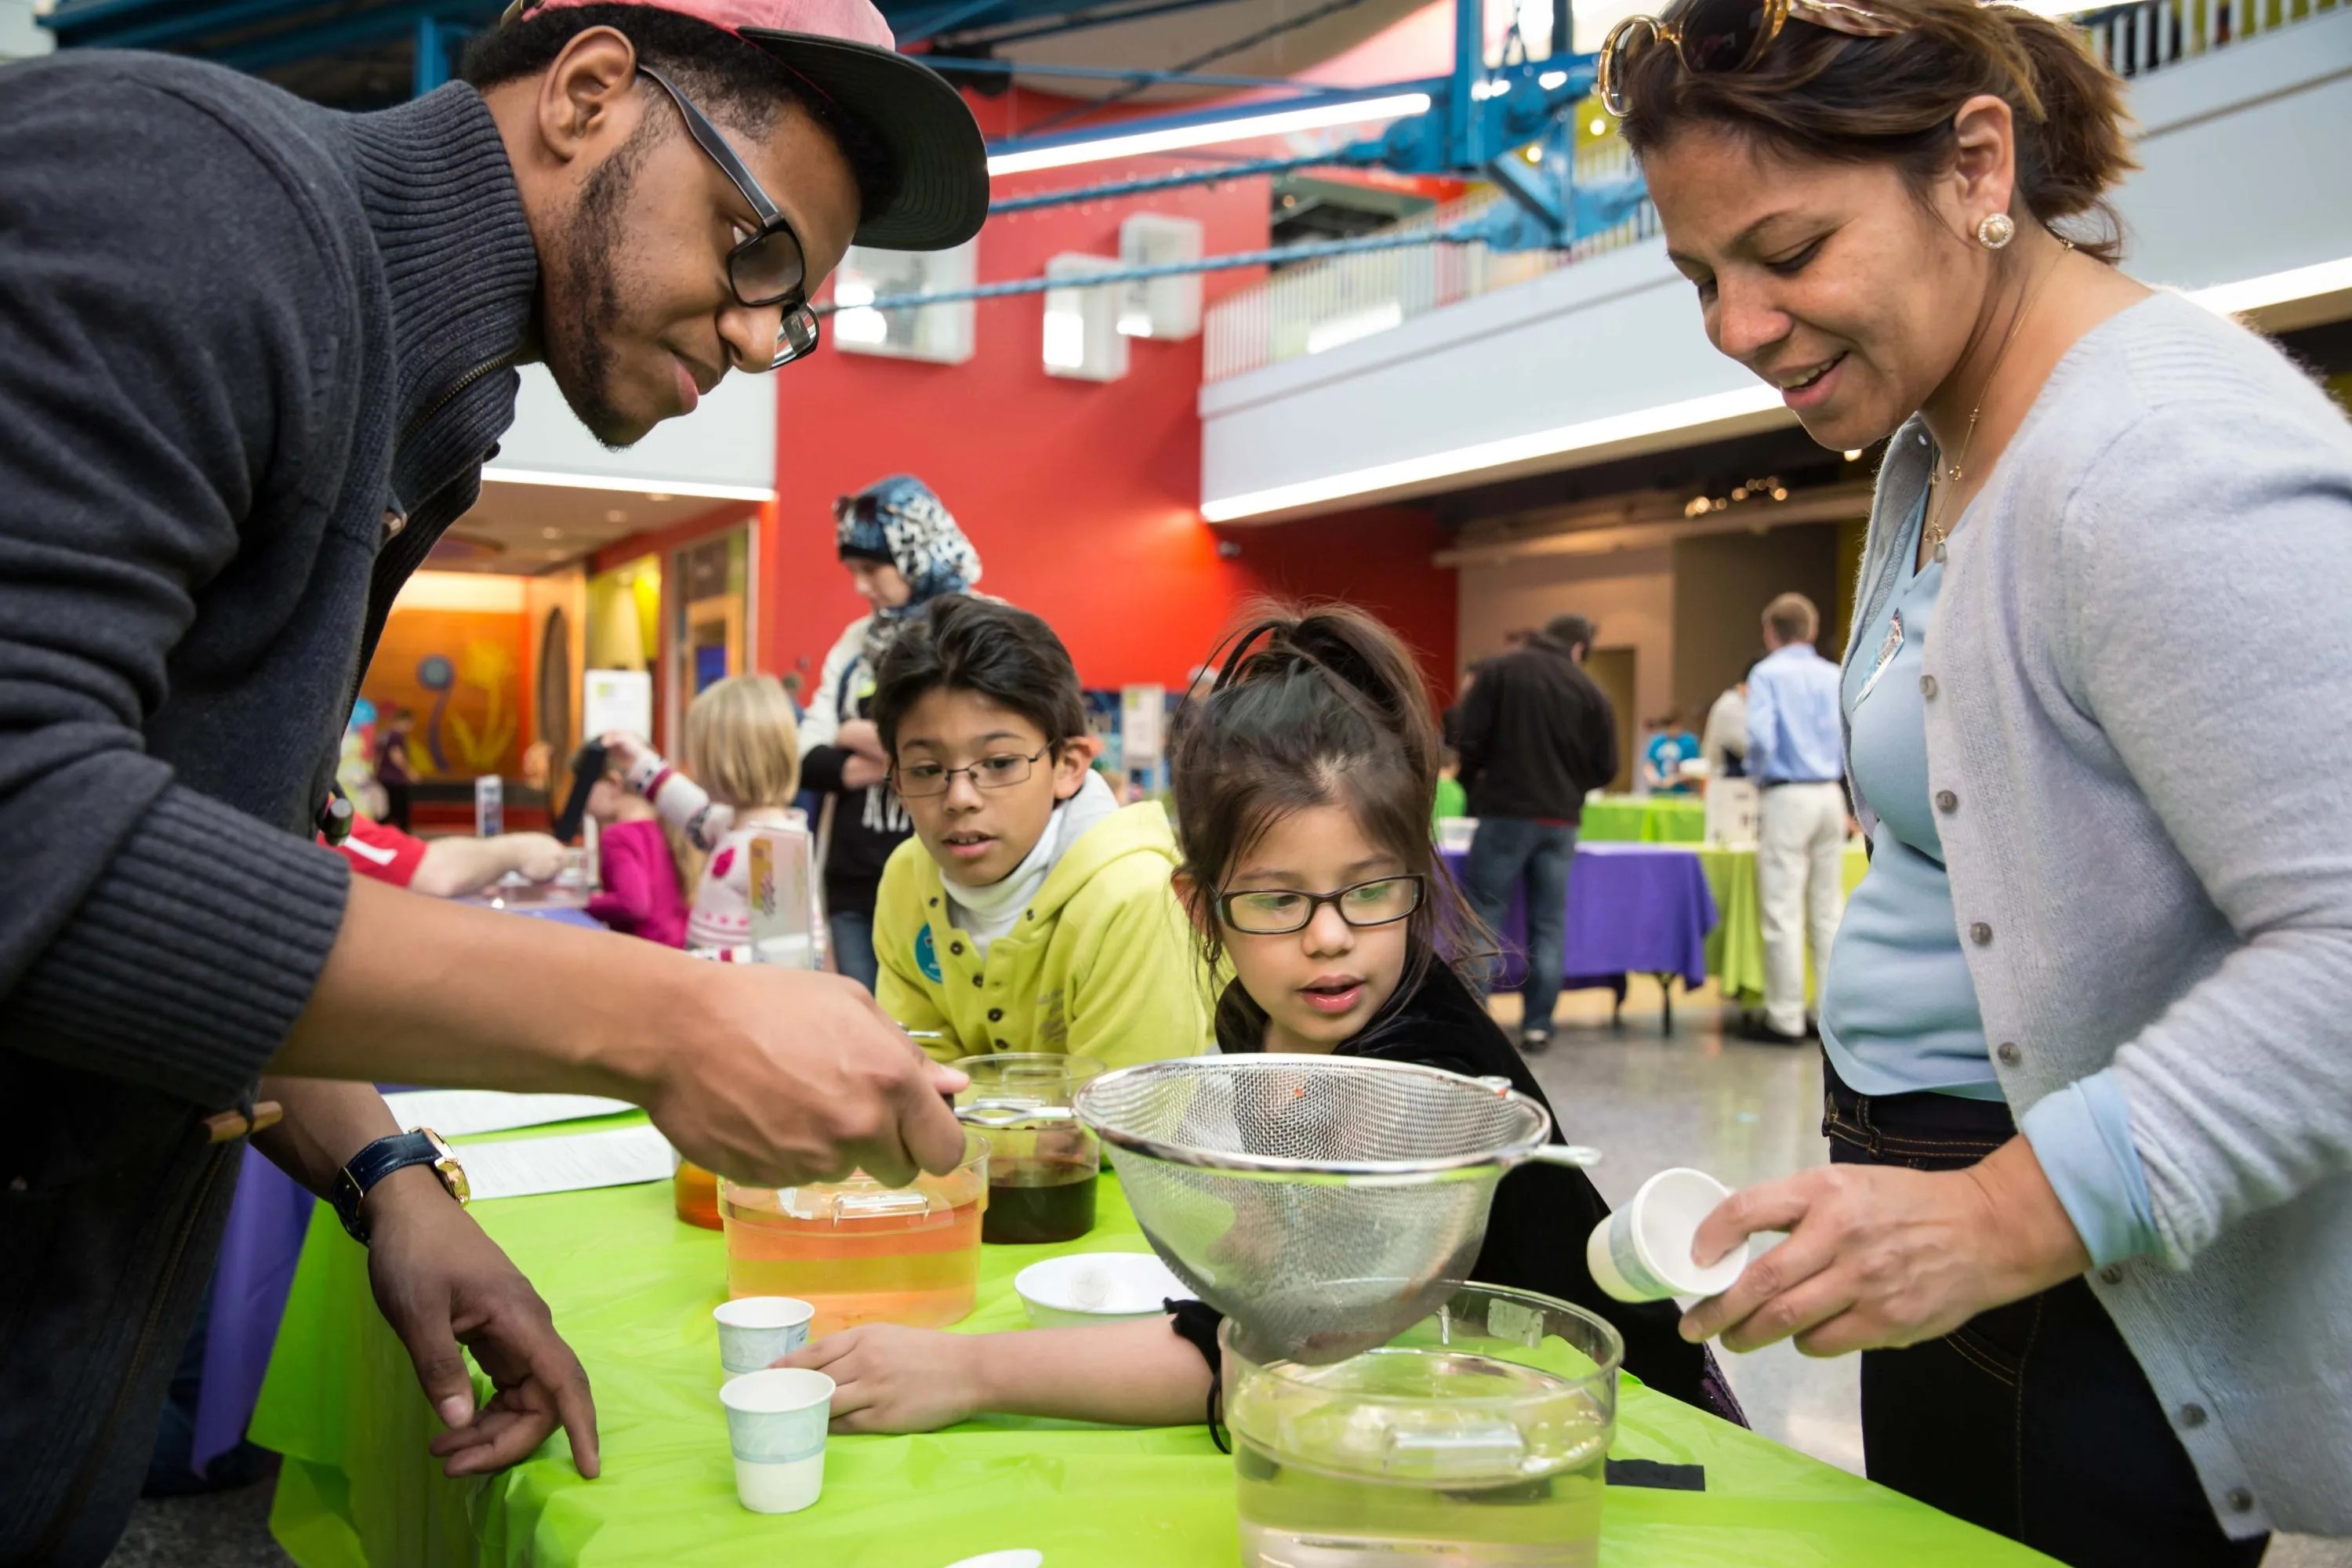 Photo of adults and kids at an activity table with a strainer and bowl of fluids